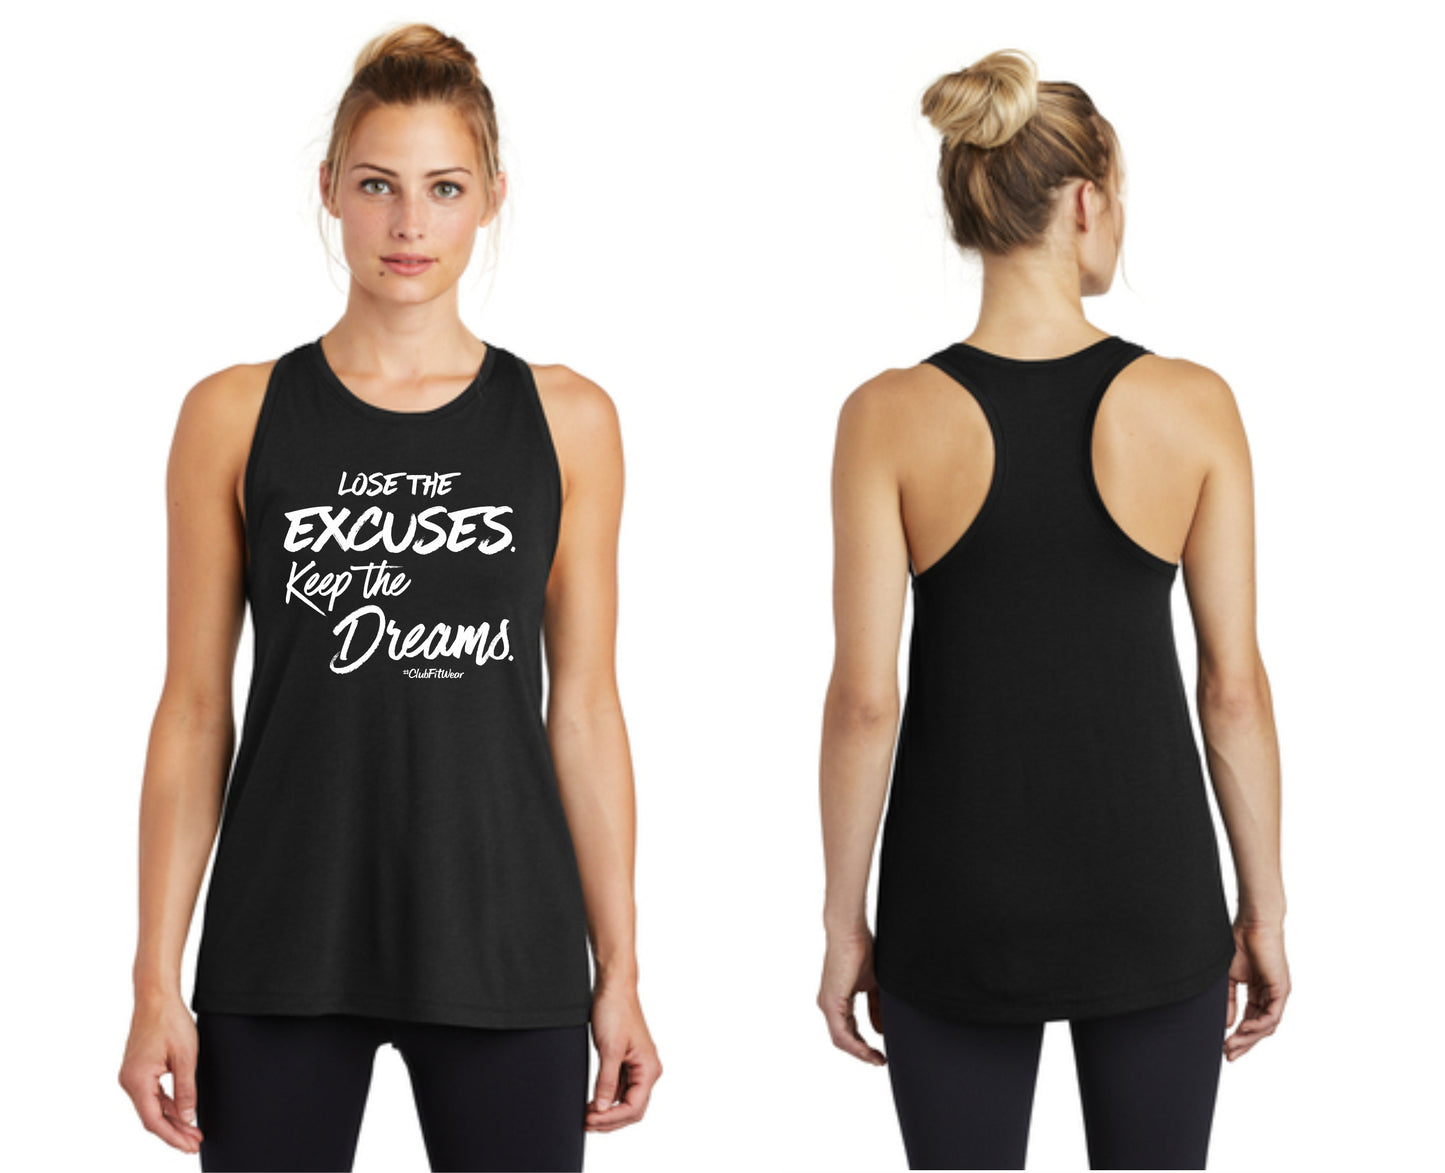 Lose the Excuse Keep the Dreams - Premium Racerback Muscle Tank